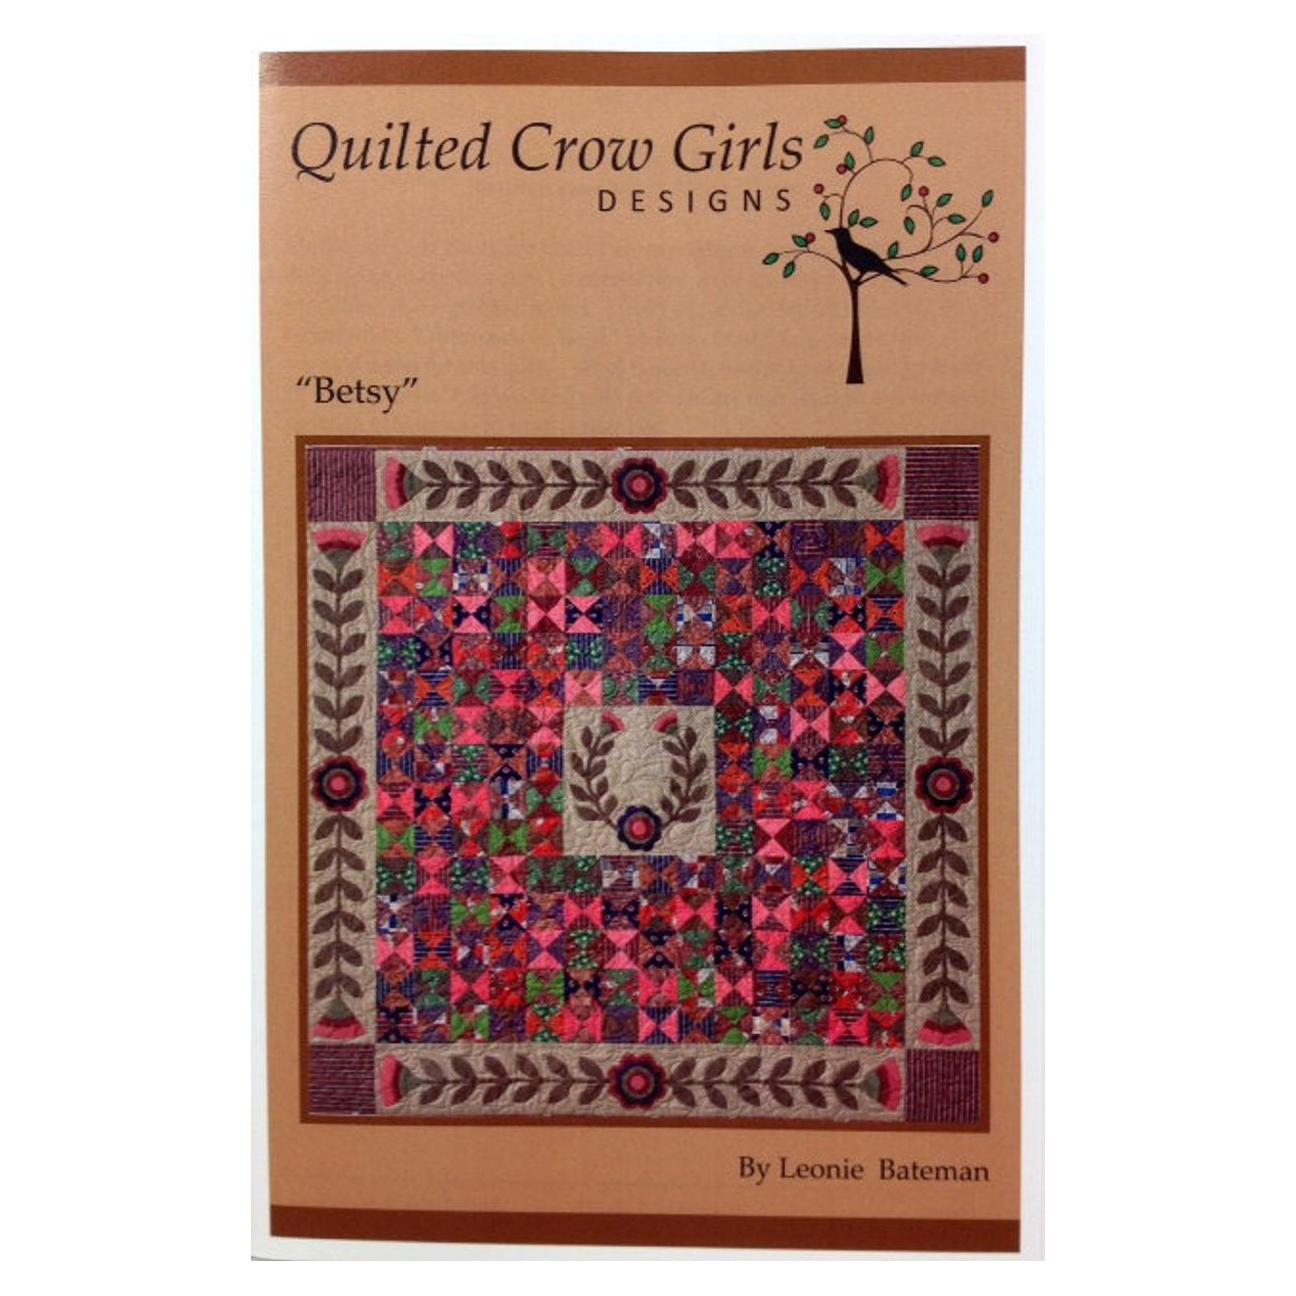 Quilted Crow Girls - "Betsy" Pattern